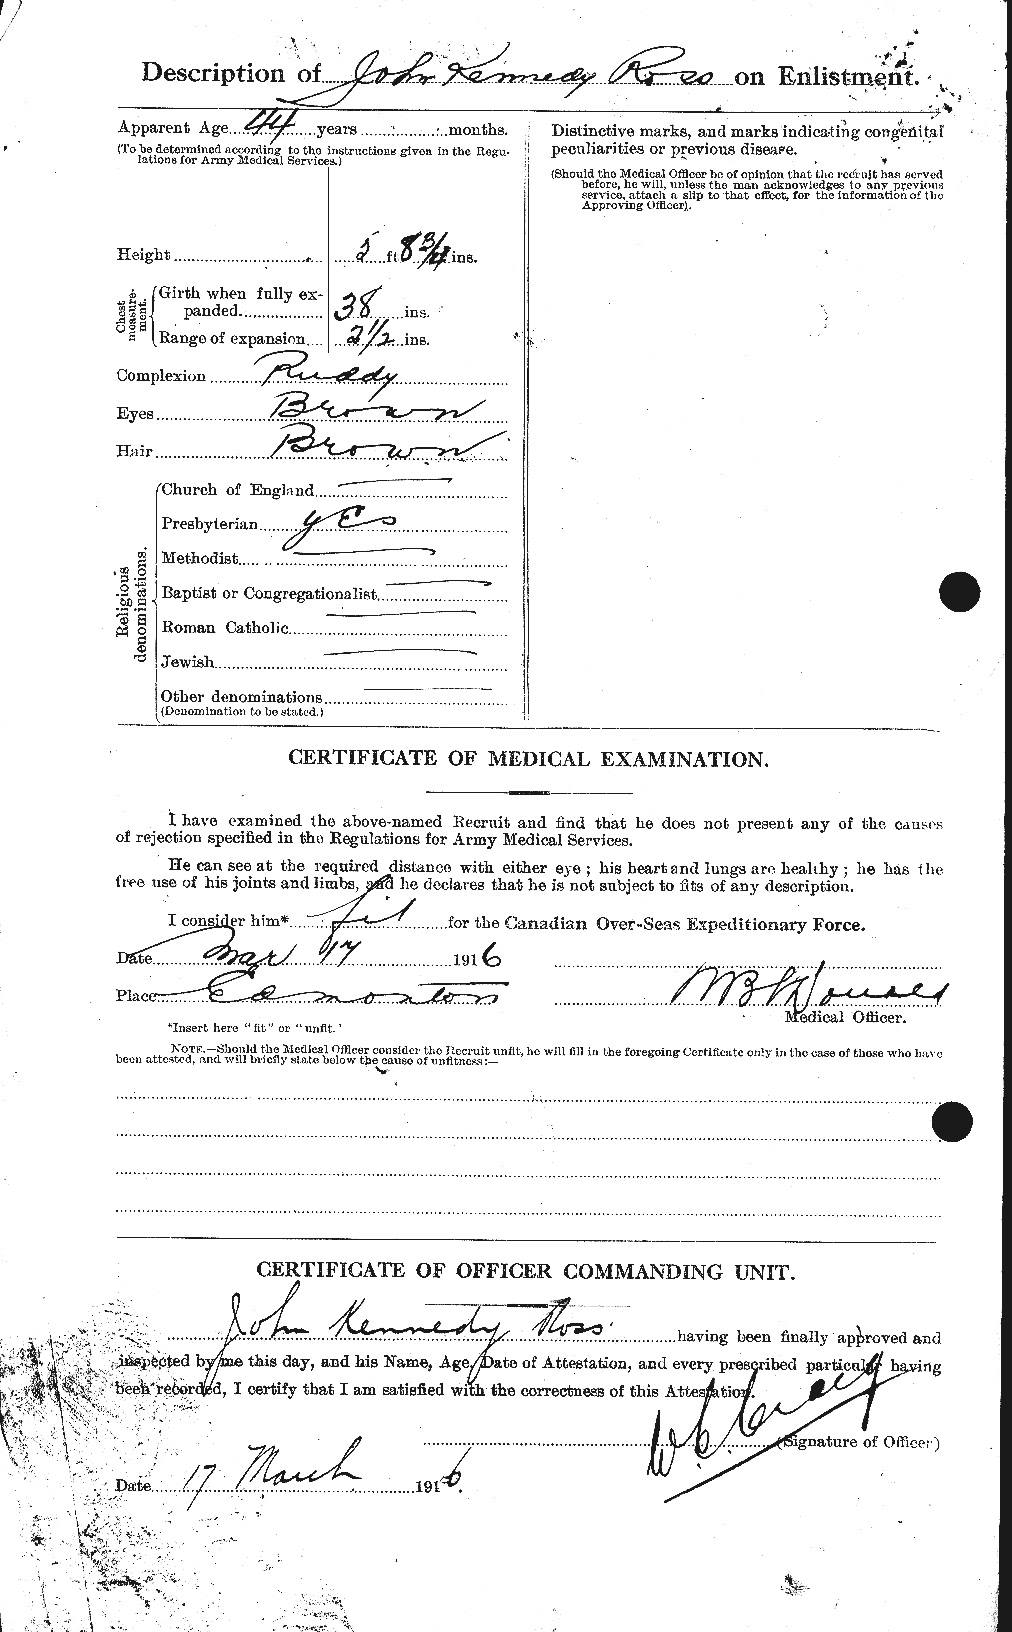 Personnel Records of the First World War - CEF 613431b